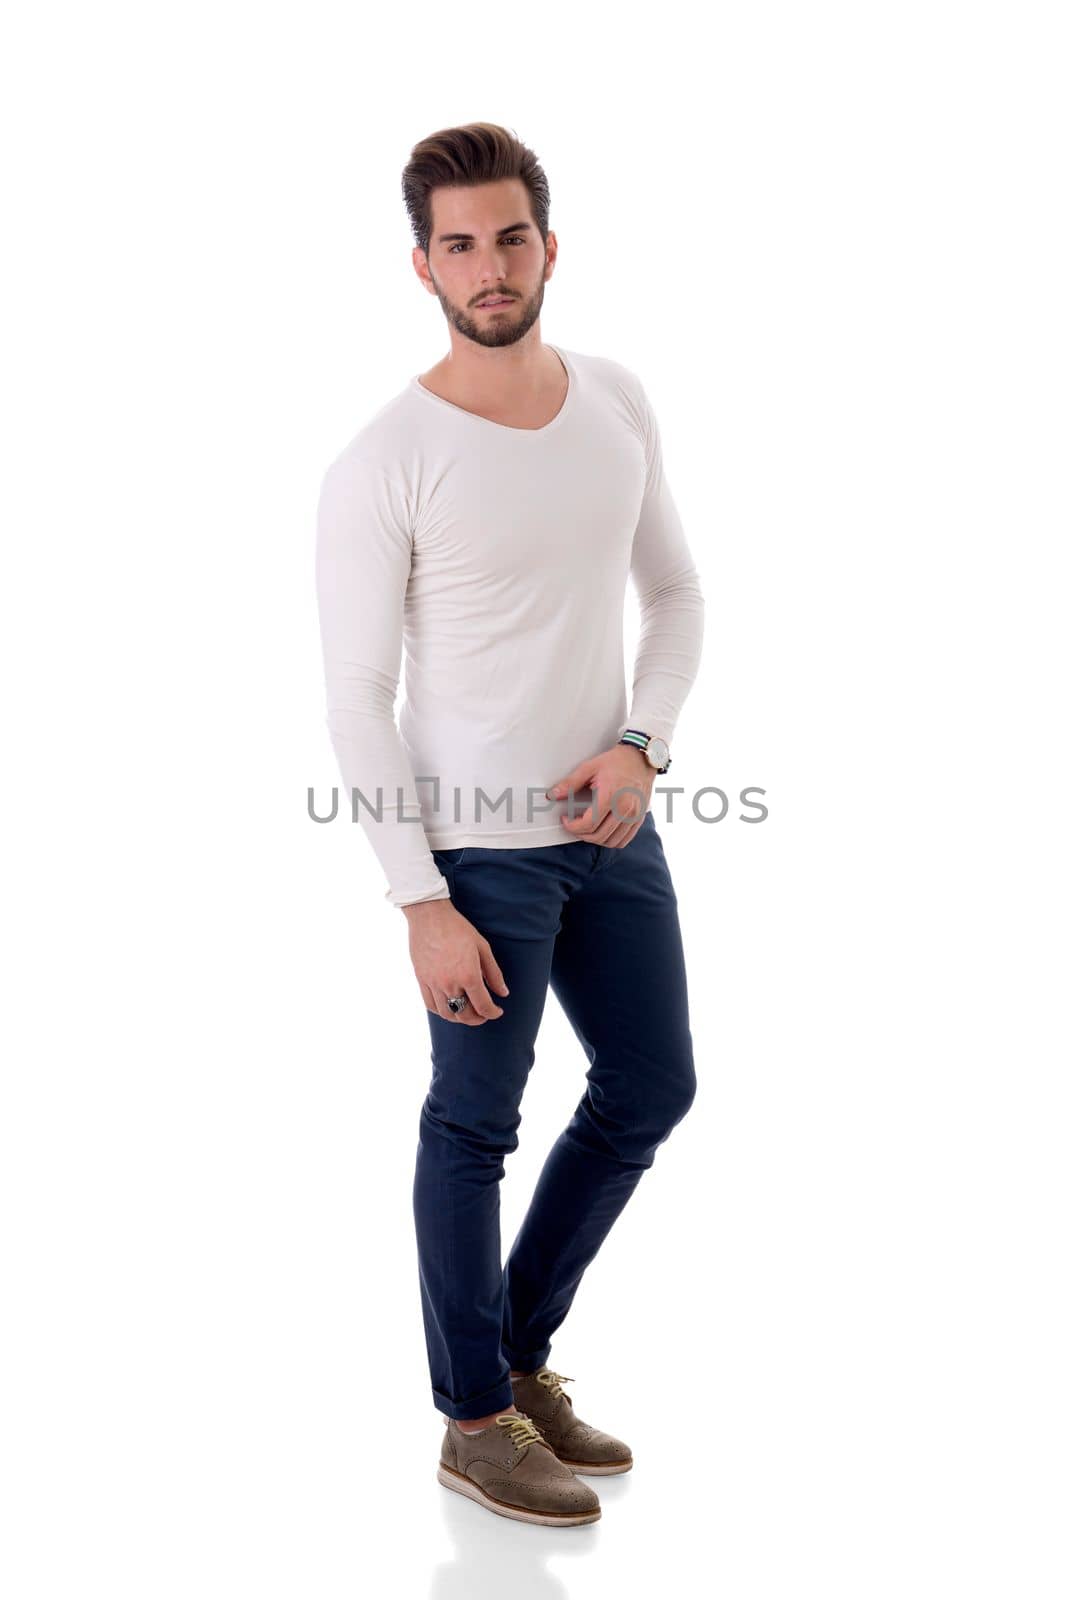 Handsome young man standing with white shirt, full length body shot, isolated